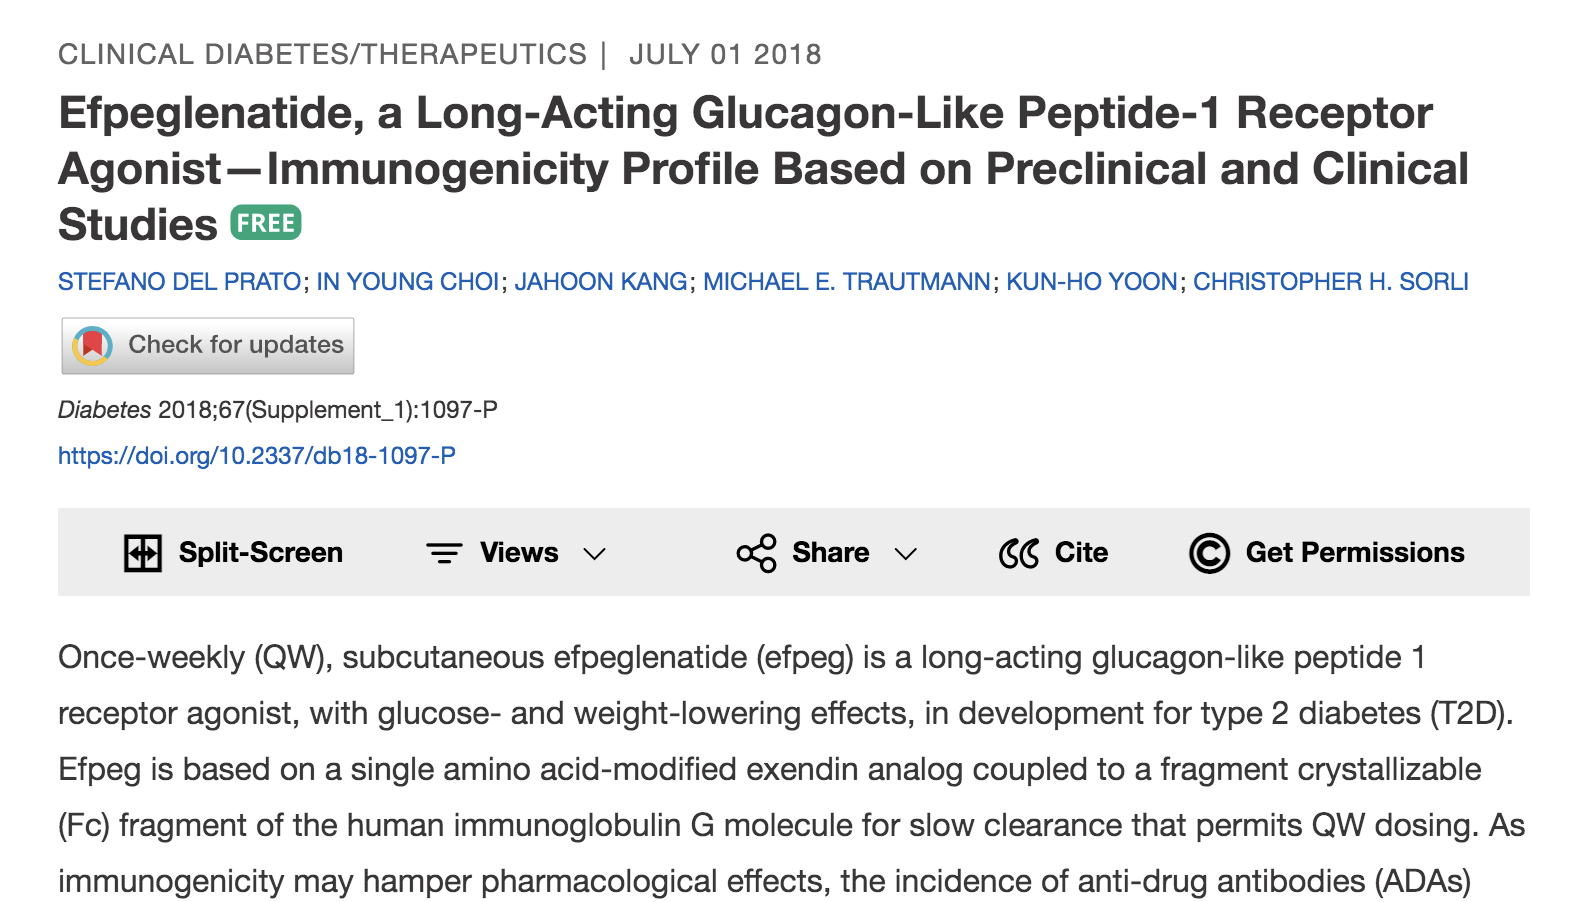 image of Efpeglenatide, a Long-Acting Glucagon-Like Peptide-1 Receptor Agonist—Immunogenicity Profile Based on Preclinical and Clinical Studies